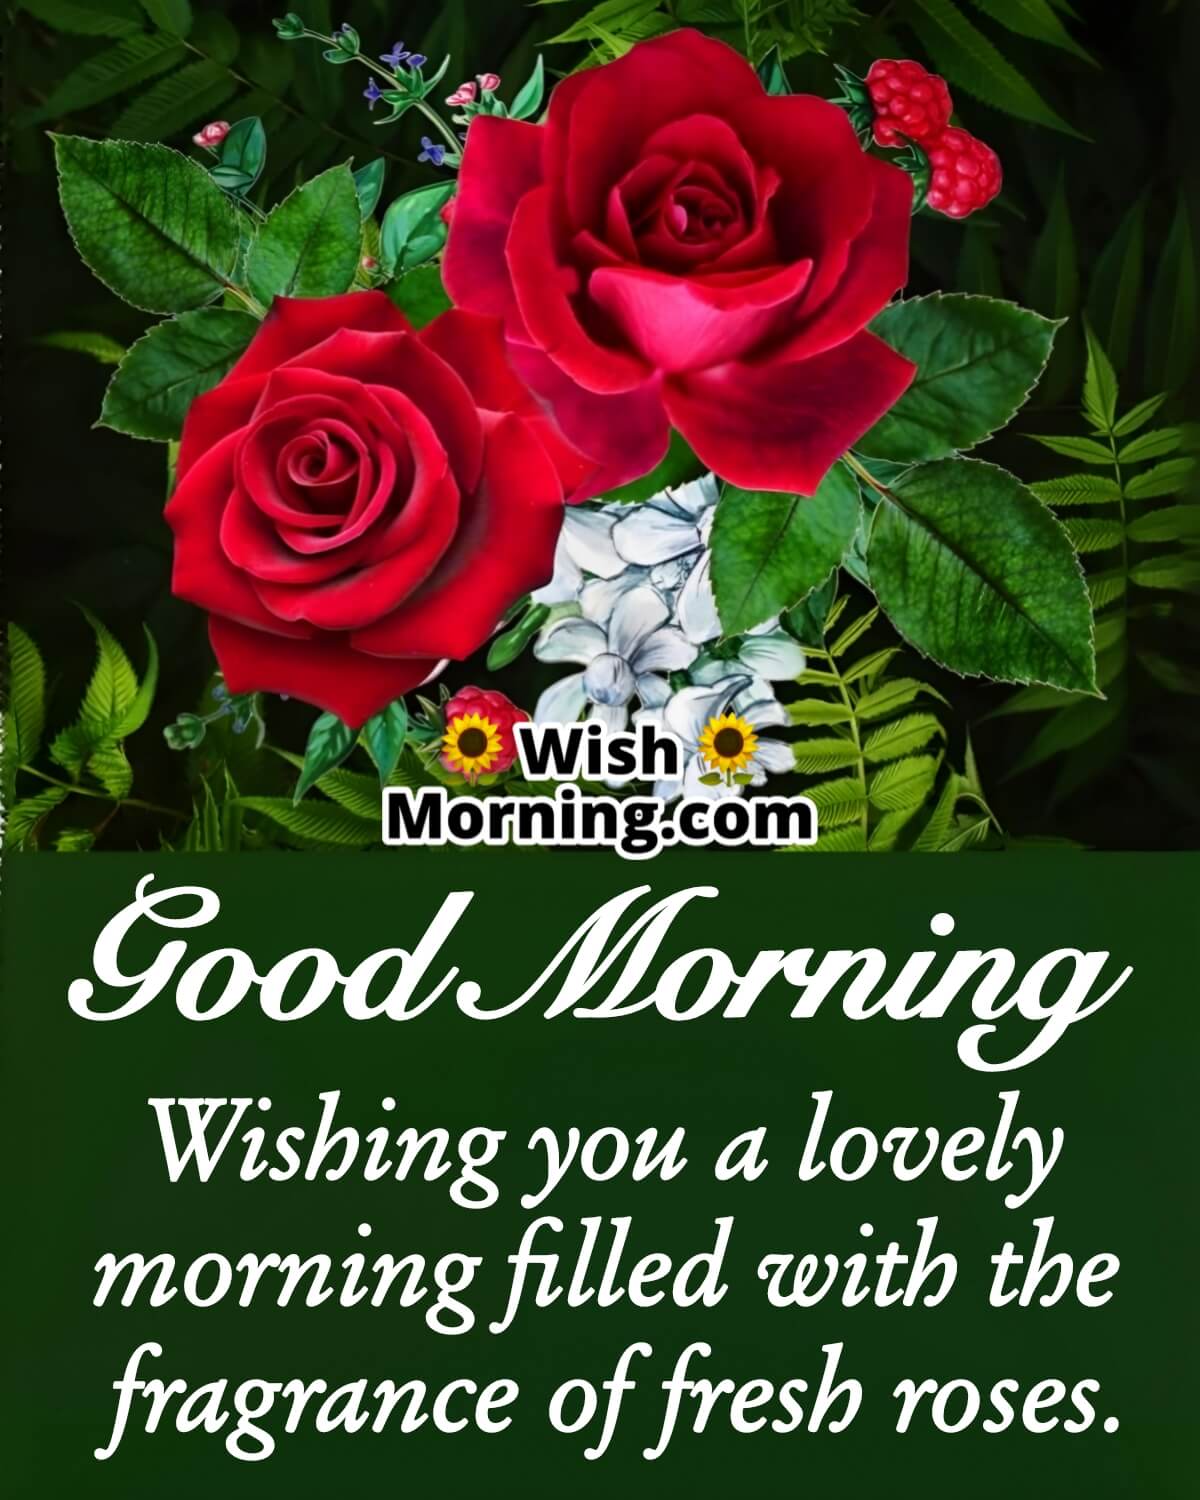 Good Morning Wish With Roses